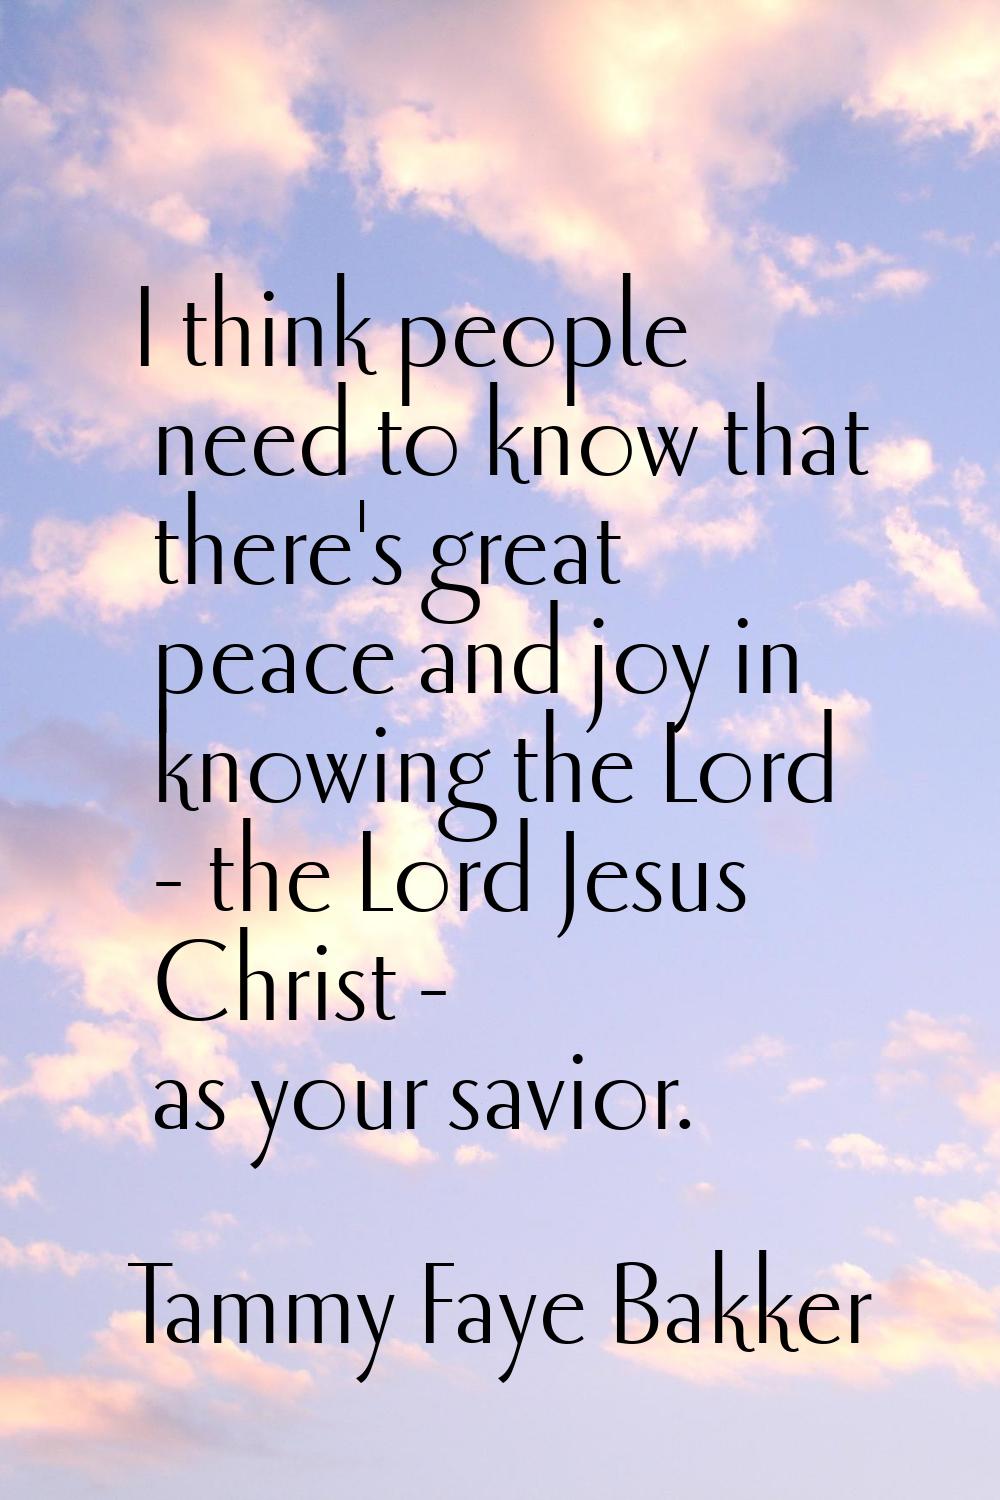 I think people need to know that there's great peace and joy in knowing the Lord - the Lord Jesus C